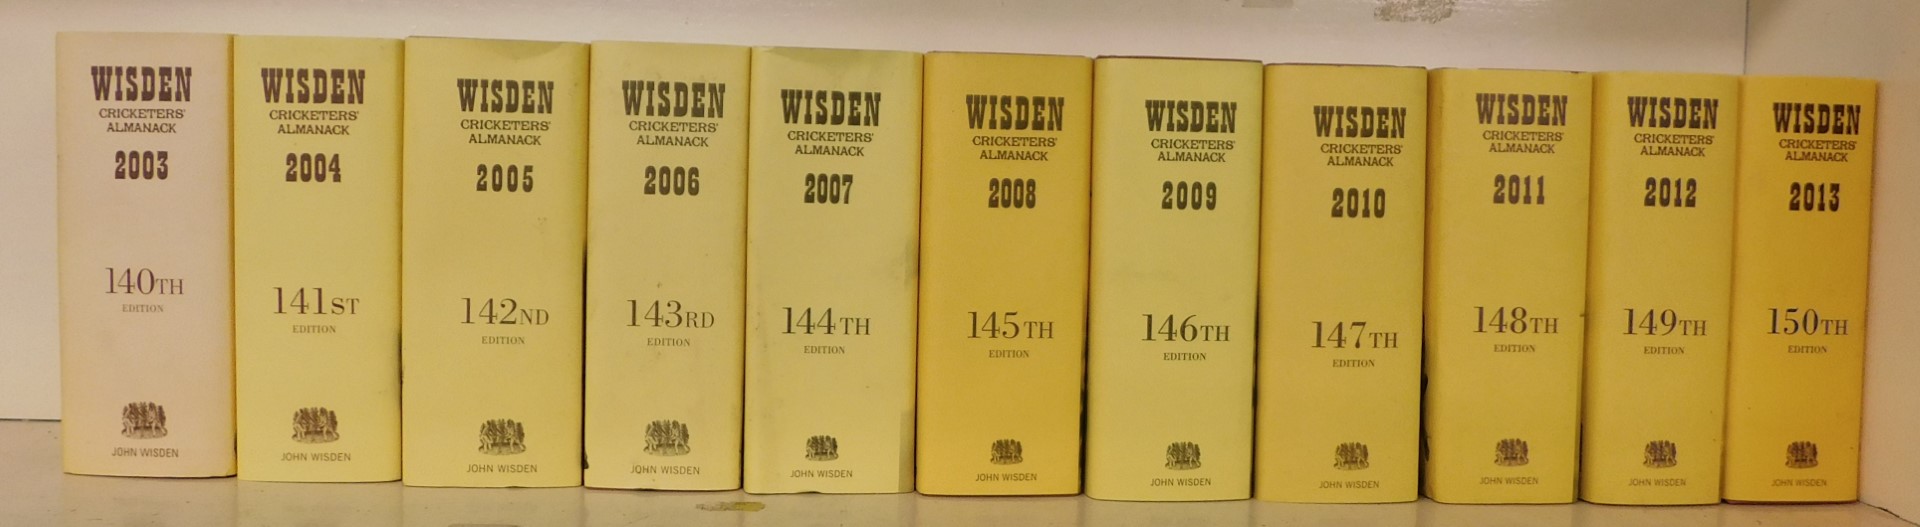 Wisden Cricketer's Almanacks 2003-2013, with dust wrappers, published by John Wisden and Company Ltd